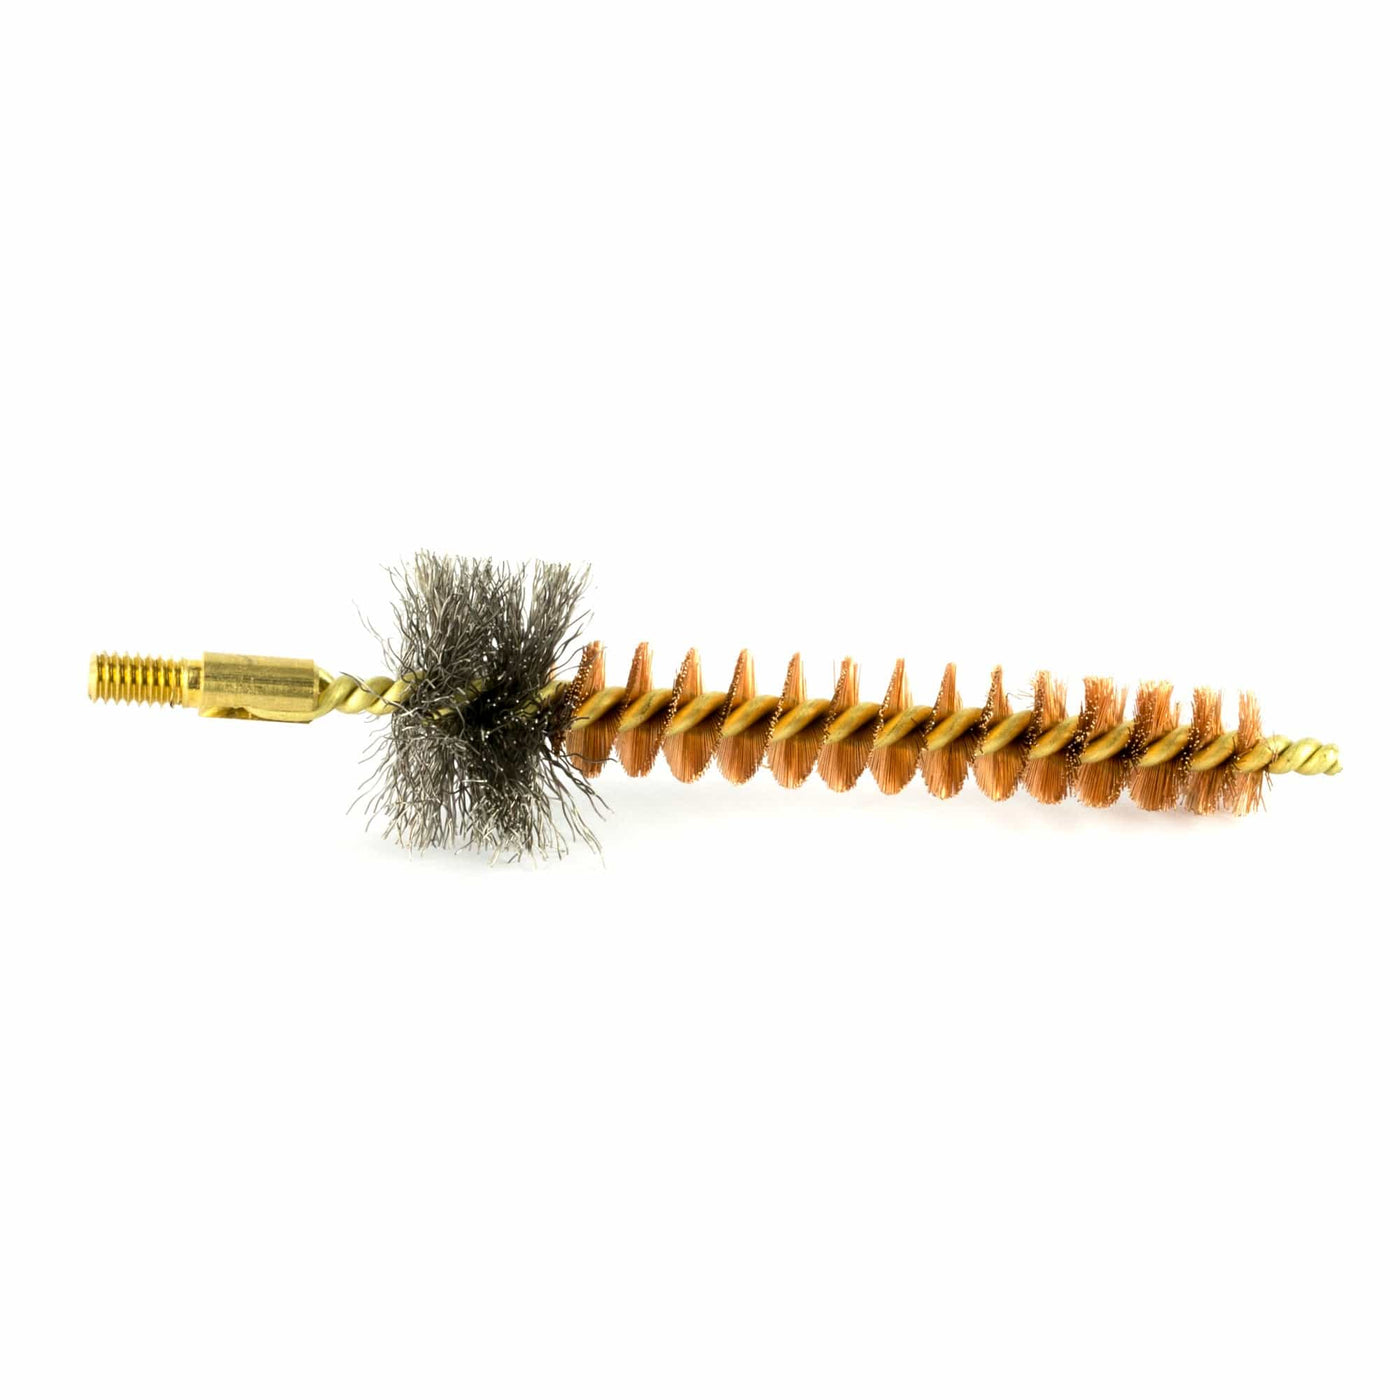 Pro-Shot Products Pro-shot Chamber Brush Ar15 Cleaning Equipment